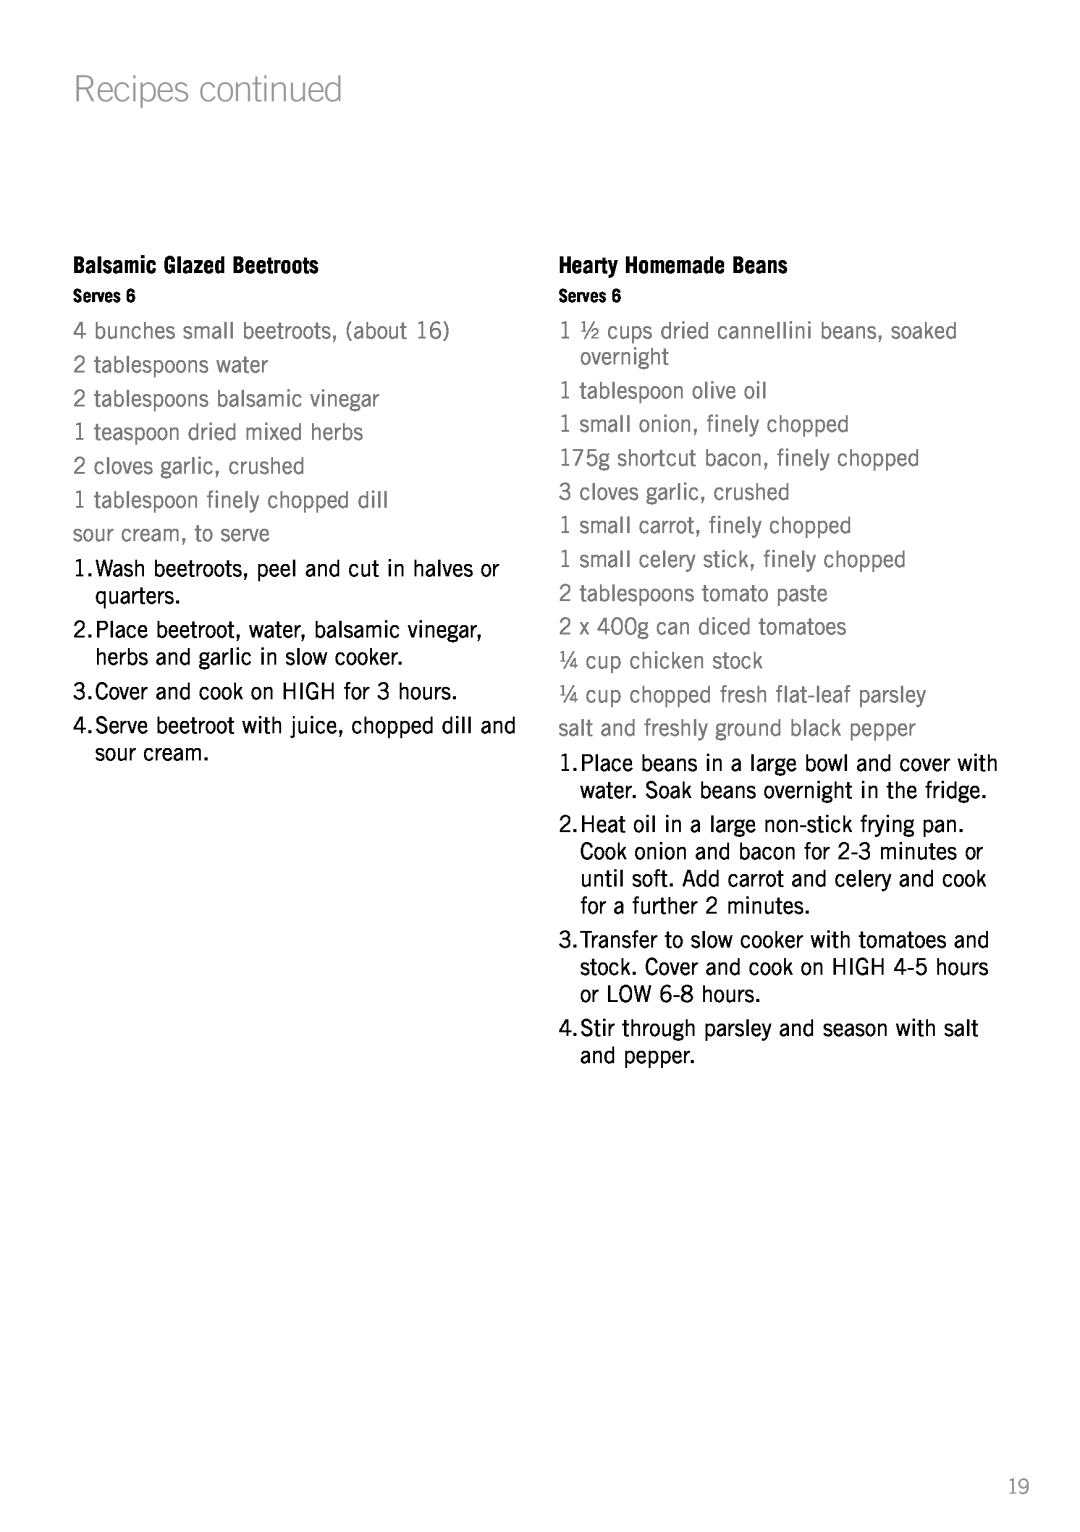 Sunbeam HP5520 manual Balsamic Glazed Beetroots, Hearty Homemade Beans, Recipes continued 